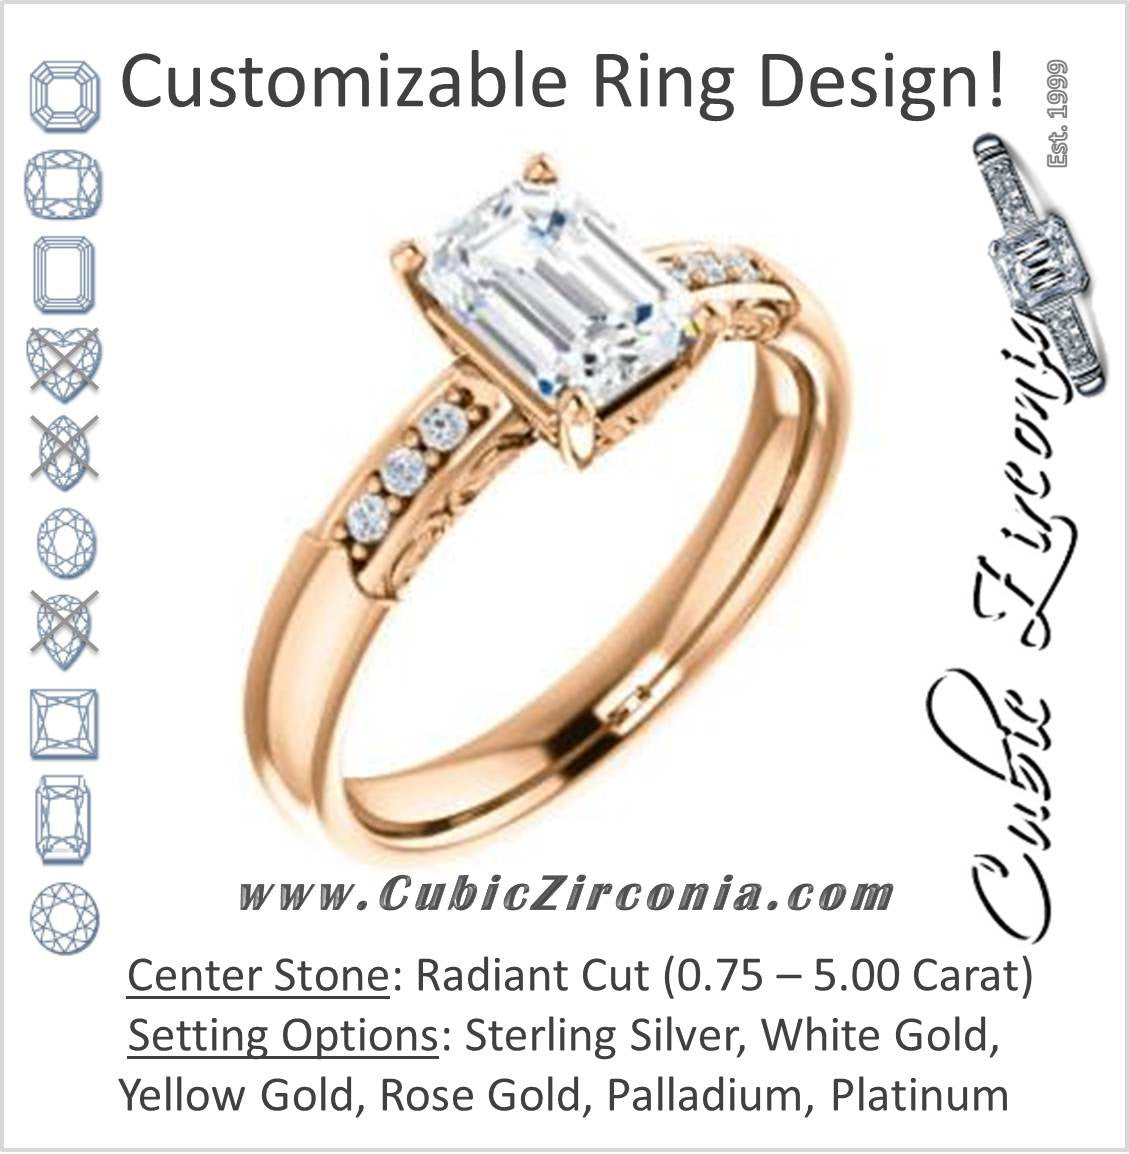 Cubic Zirconia Engagement Ring- The Migdala (Customizable 7-stone Radiant Cut Design with Round Channel Accents & Decorative Filigree)